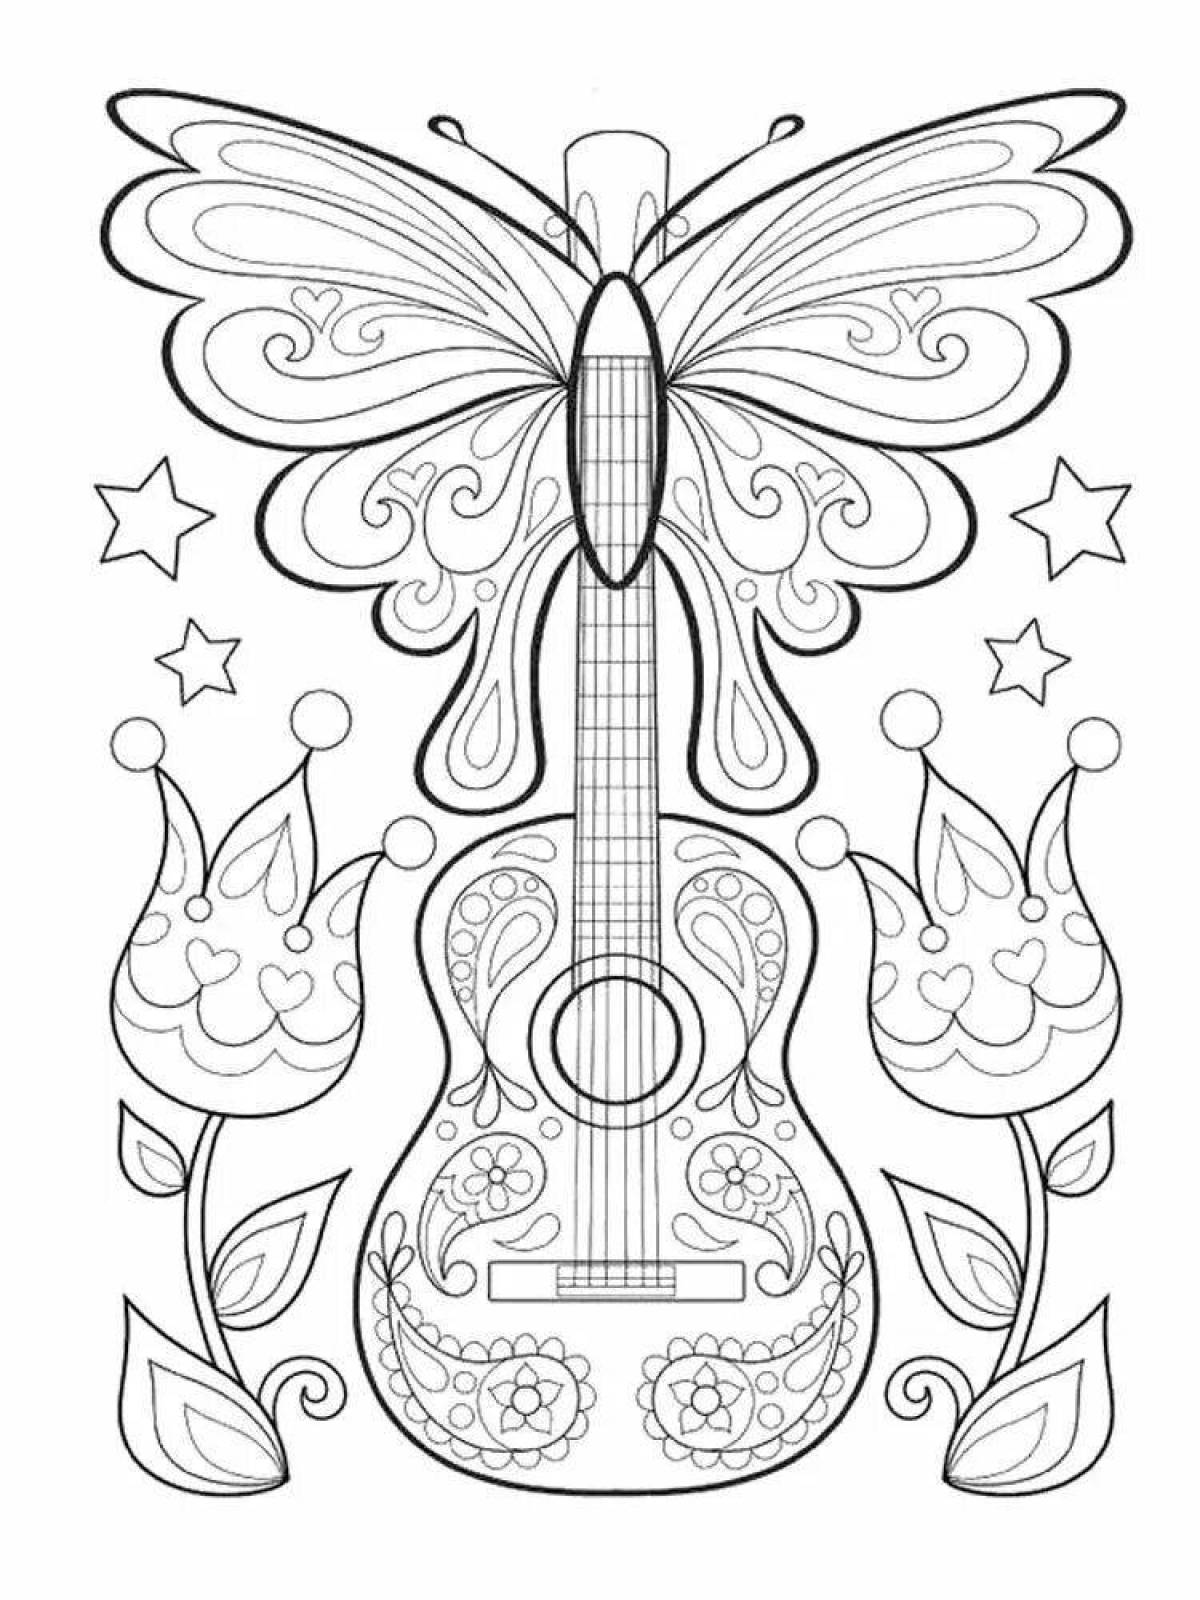 Radiant coloring page anti-stress music